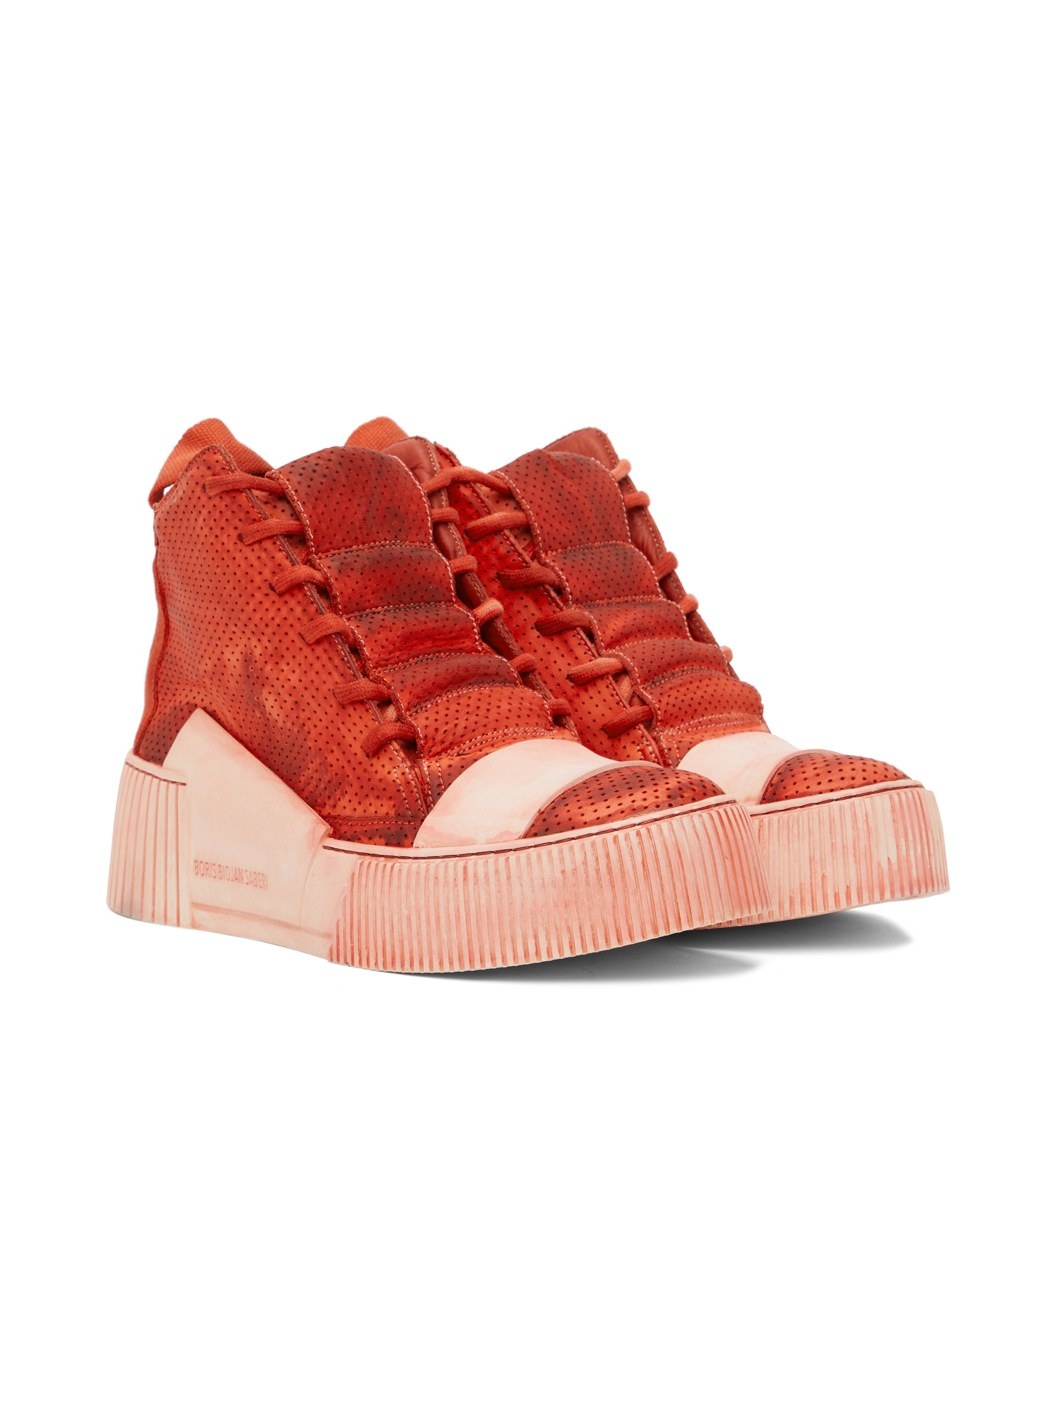 SSENSE Exclusive Red Bamba 1.1 Sneakers - 4